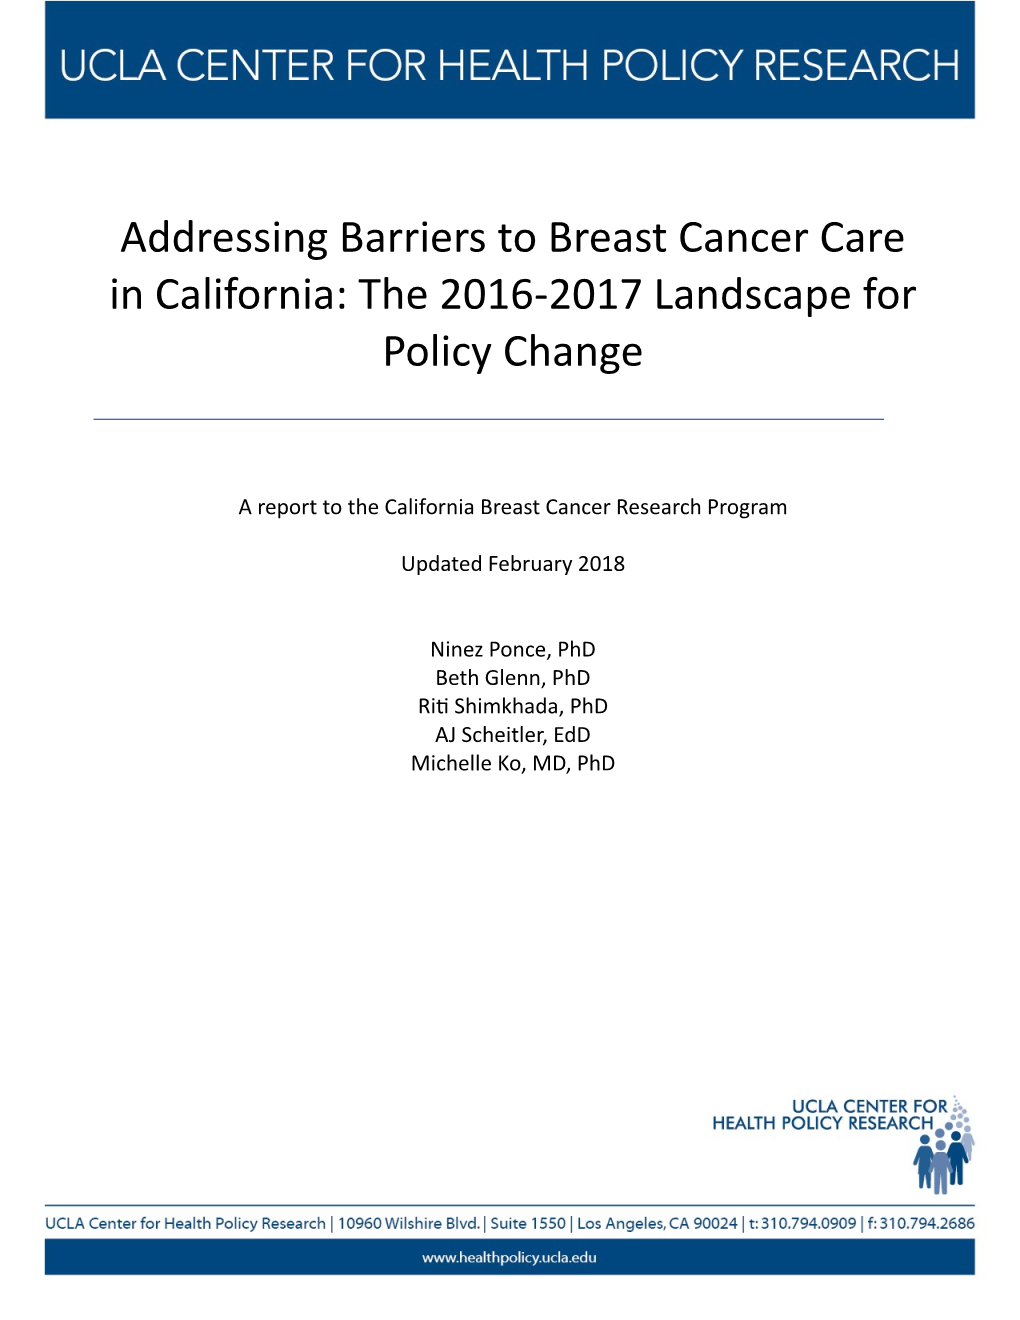 Addressing Barriers to Breast Cancer Care in California: the 2016-2017 Landscape for Policy Change